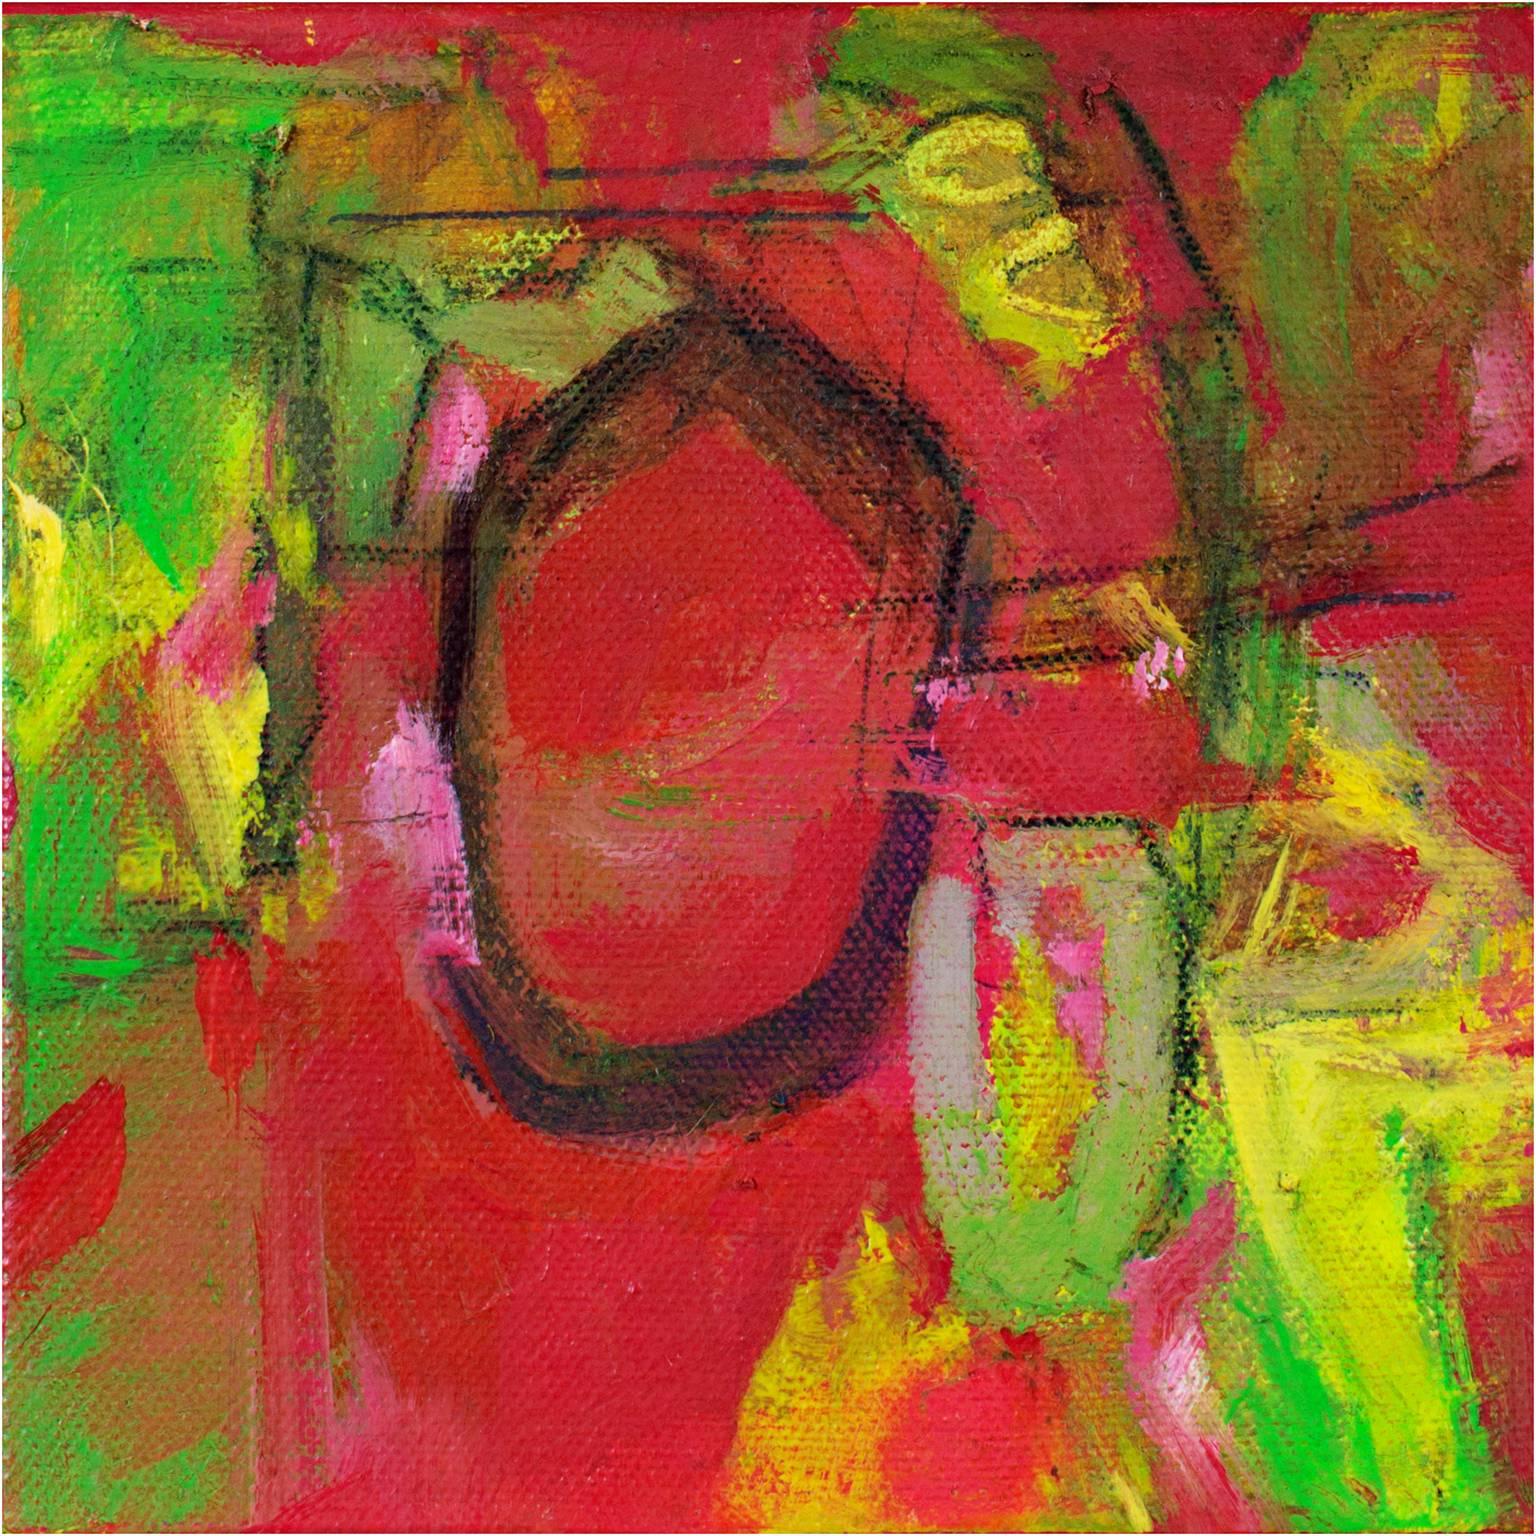 "Jam Session III" is an original oil painting on canvas by Alayna Rose. This painting features a variety of abstract marks in bright green and yellow over a bright pink background. The David Barnett Gallery has the other two paintings in this